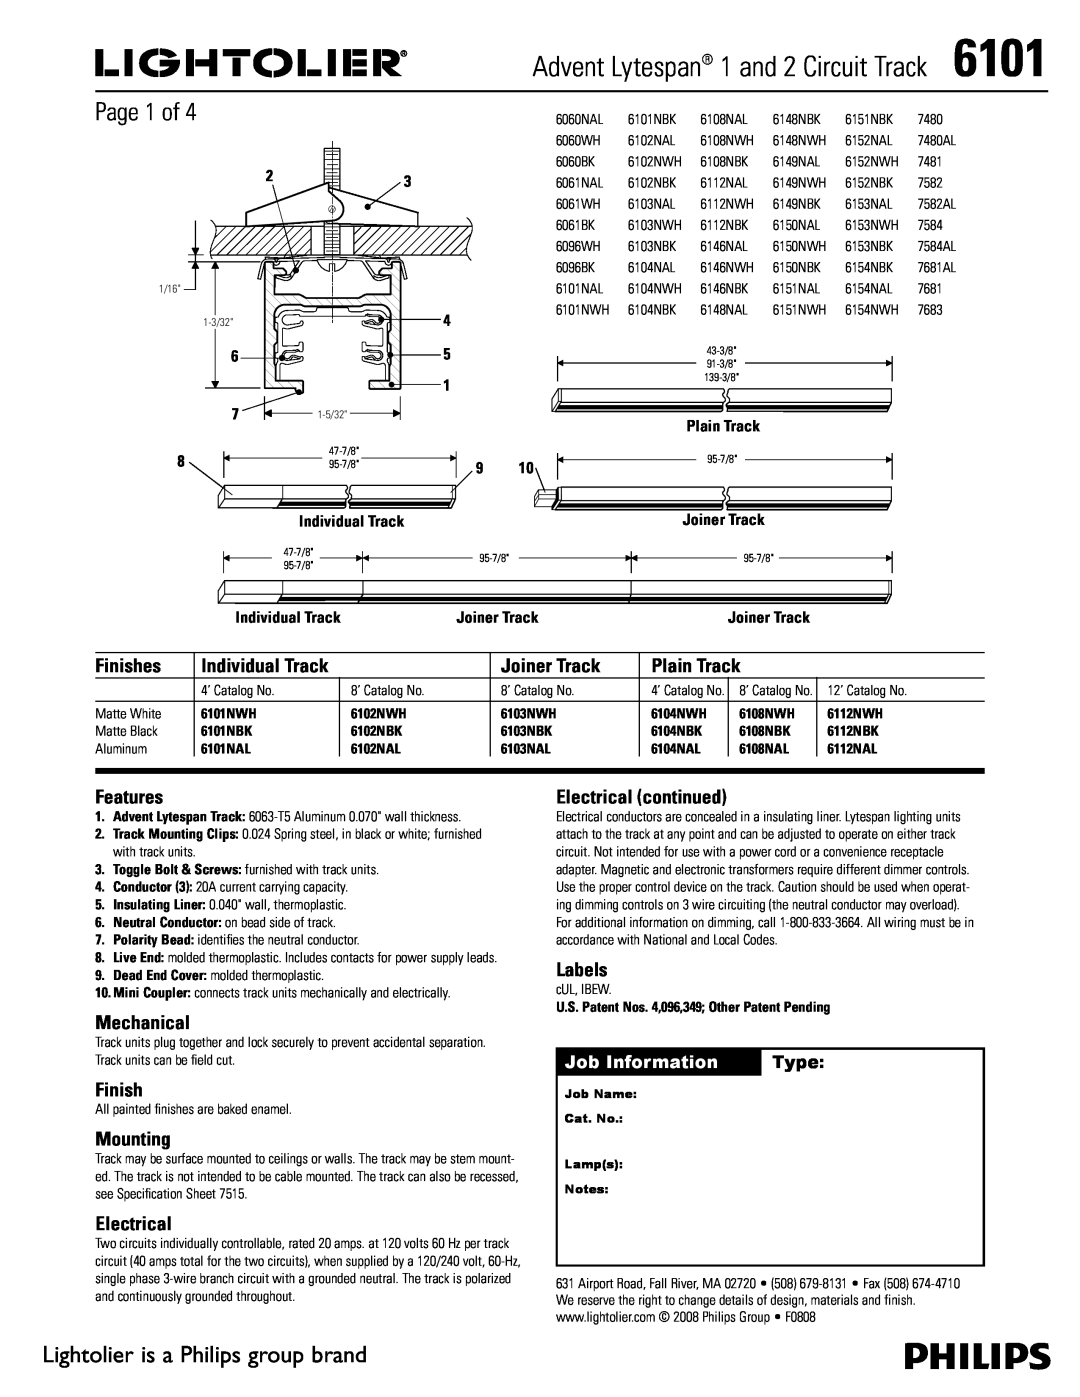 Lightolier 6101 manual Page 1 of, Lightolier is a Philips group brand, Finishes, Joiner Track, Plain Track, Features 